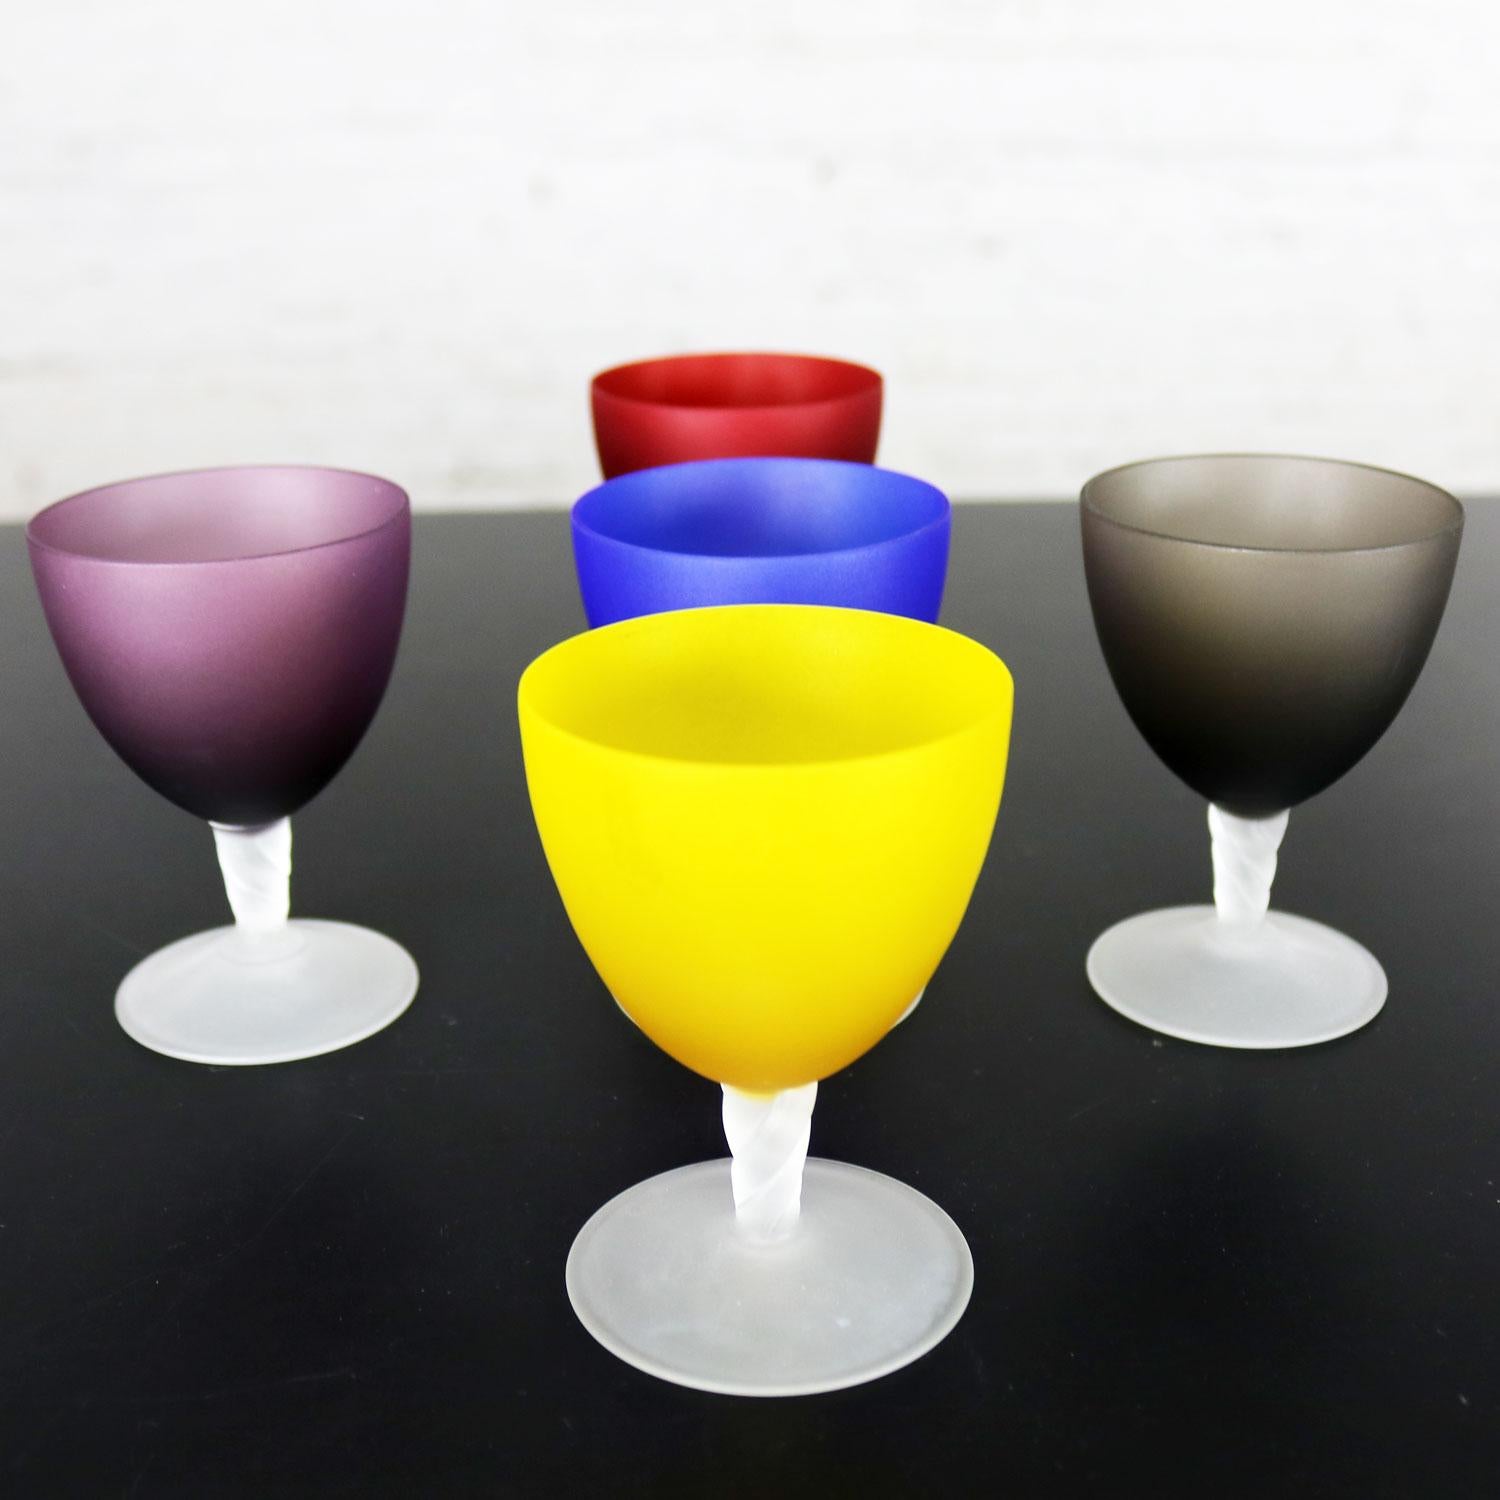 Set of 5 Small Multicolored Frosted Glass Wine Coupes or Cordial Glasses 5